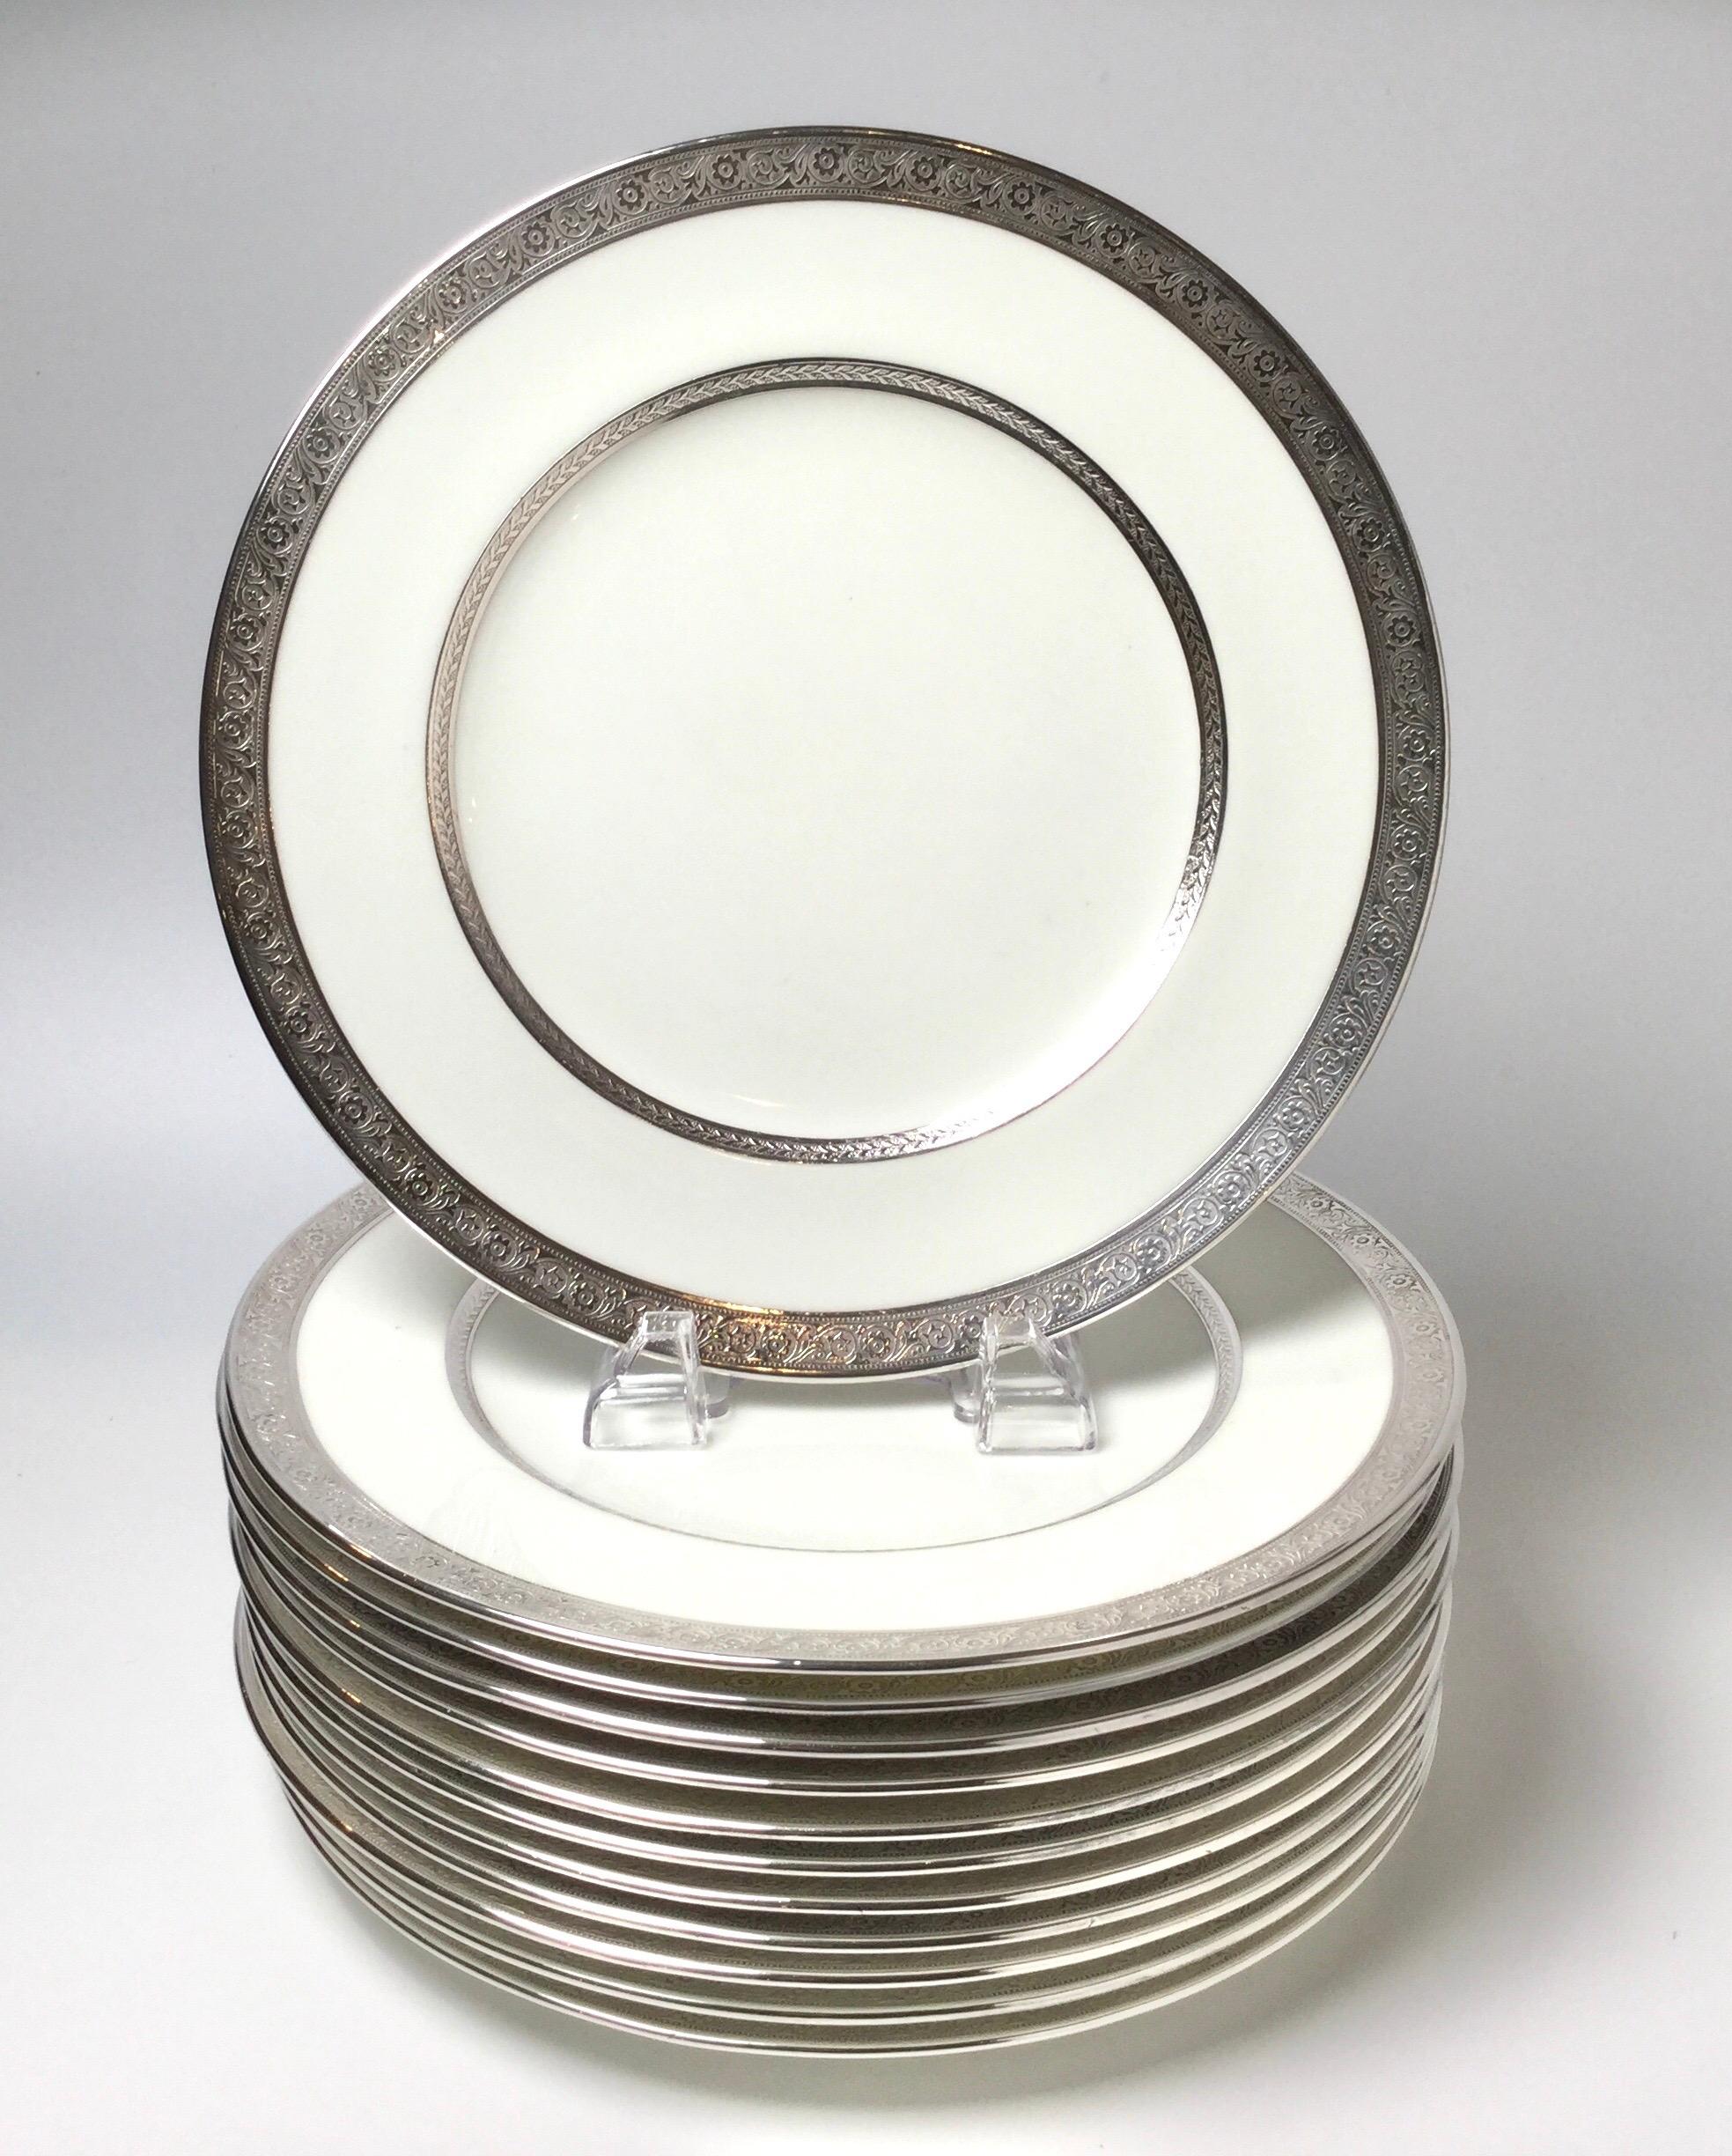 Set of 12 sterling overlay service plates. Ivory white porcelain with sterling silver banding. Made by Cauldon England. Retailed by Ovington Bros. NYC. Measure: 10 3/4